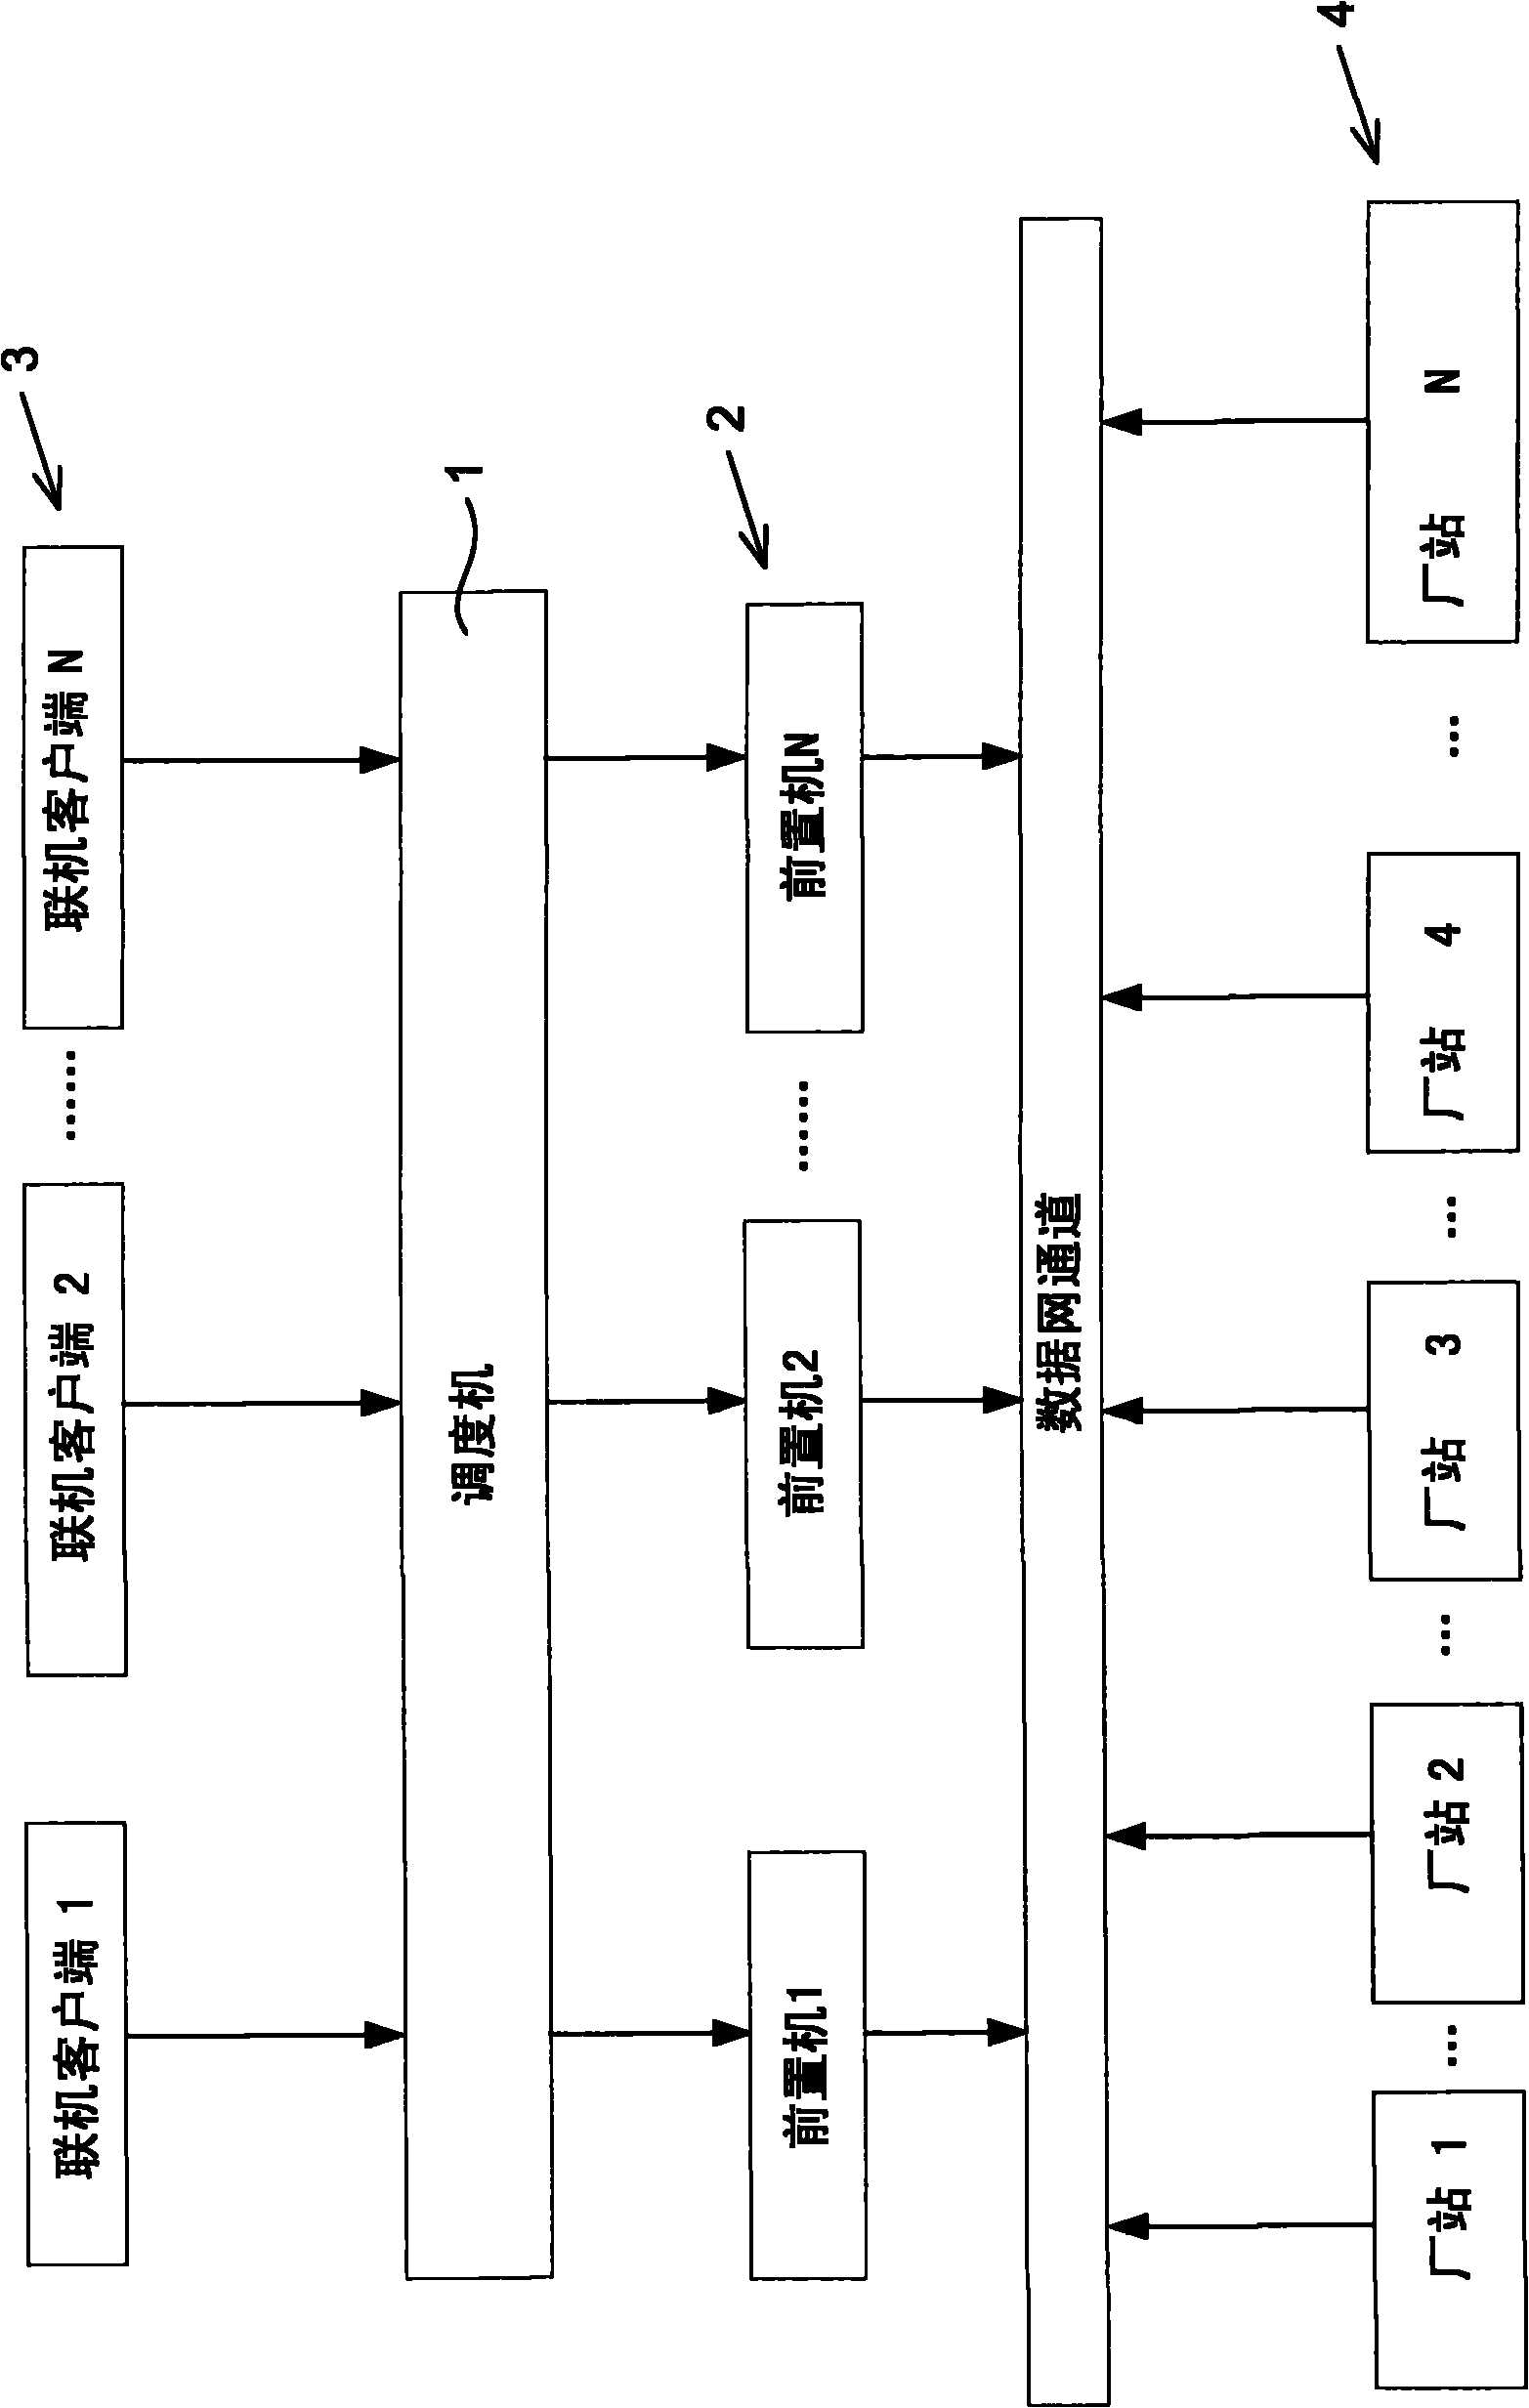 Protection fault information processing system based on dynamic load balance and mutual hot backup